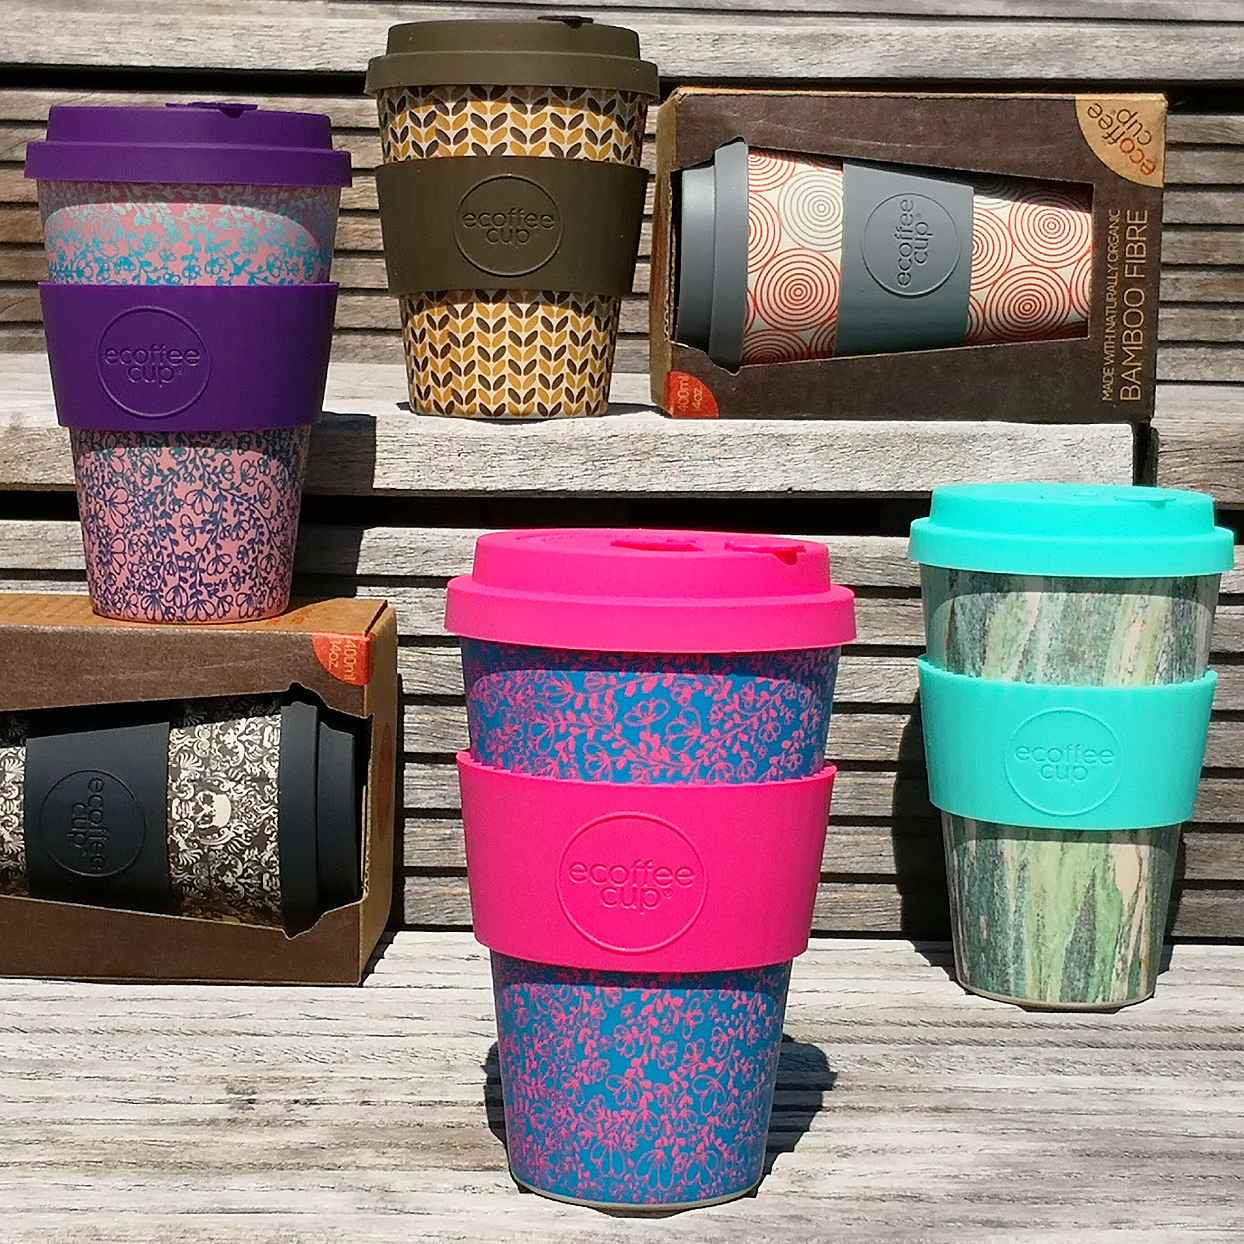 Ecoffee Cup: Activating re-use for everyone